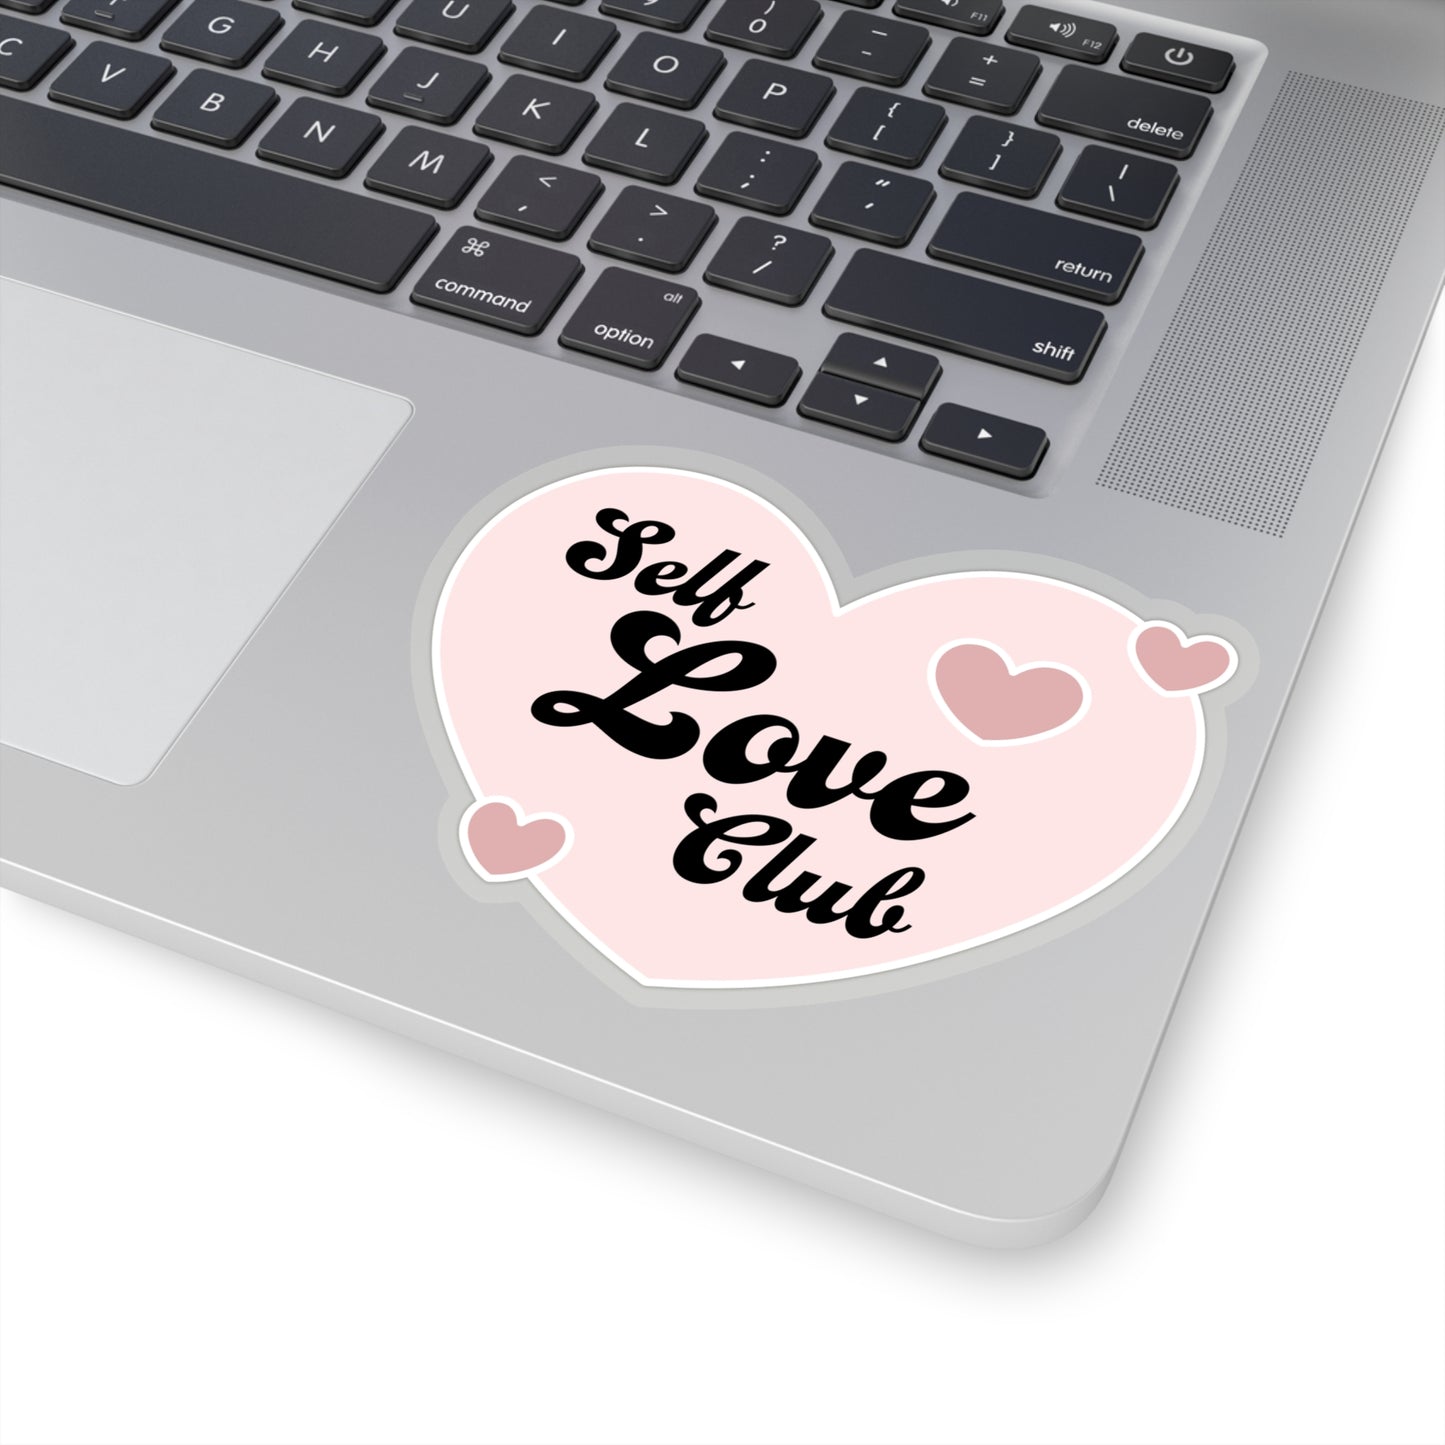 Lovely Kiss-Cut Stickers Valentines Day Self Love Club Decorative Stickers for cards, Scrapbooks, gift tags, or on their own